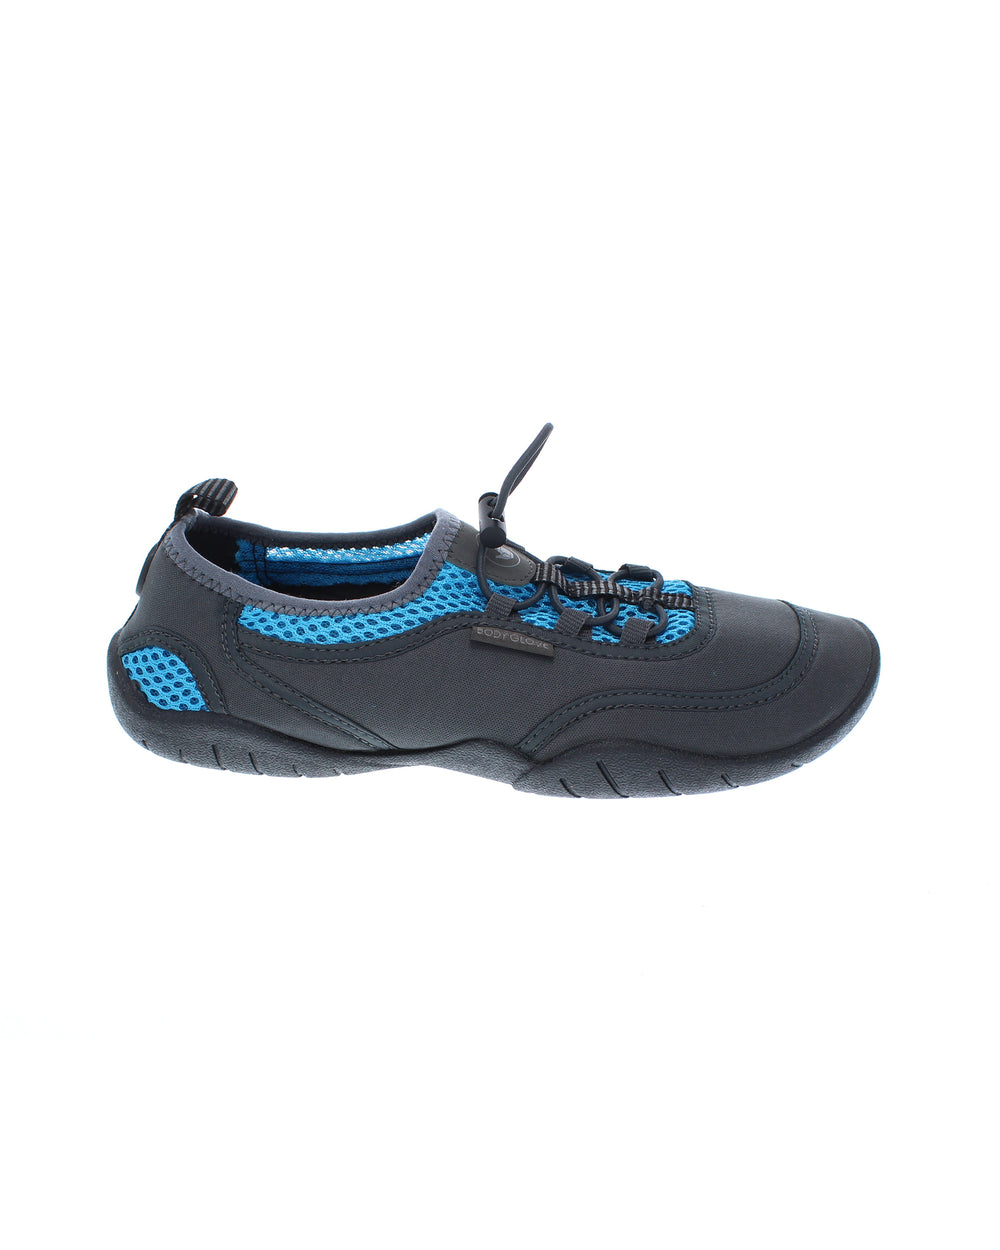 Women's Surge Water Shoes - Charcoal/Poolside Azure - Body Glove